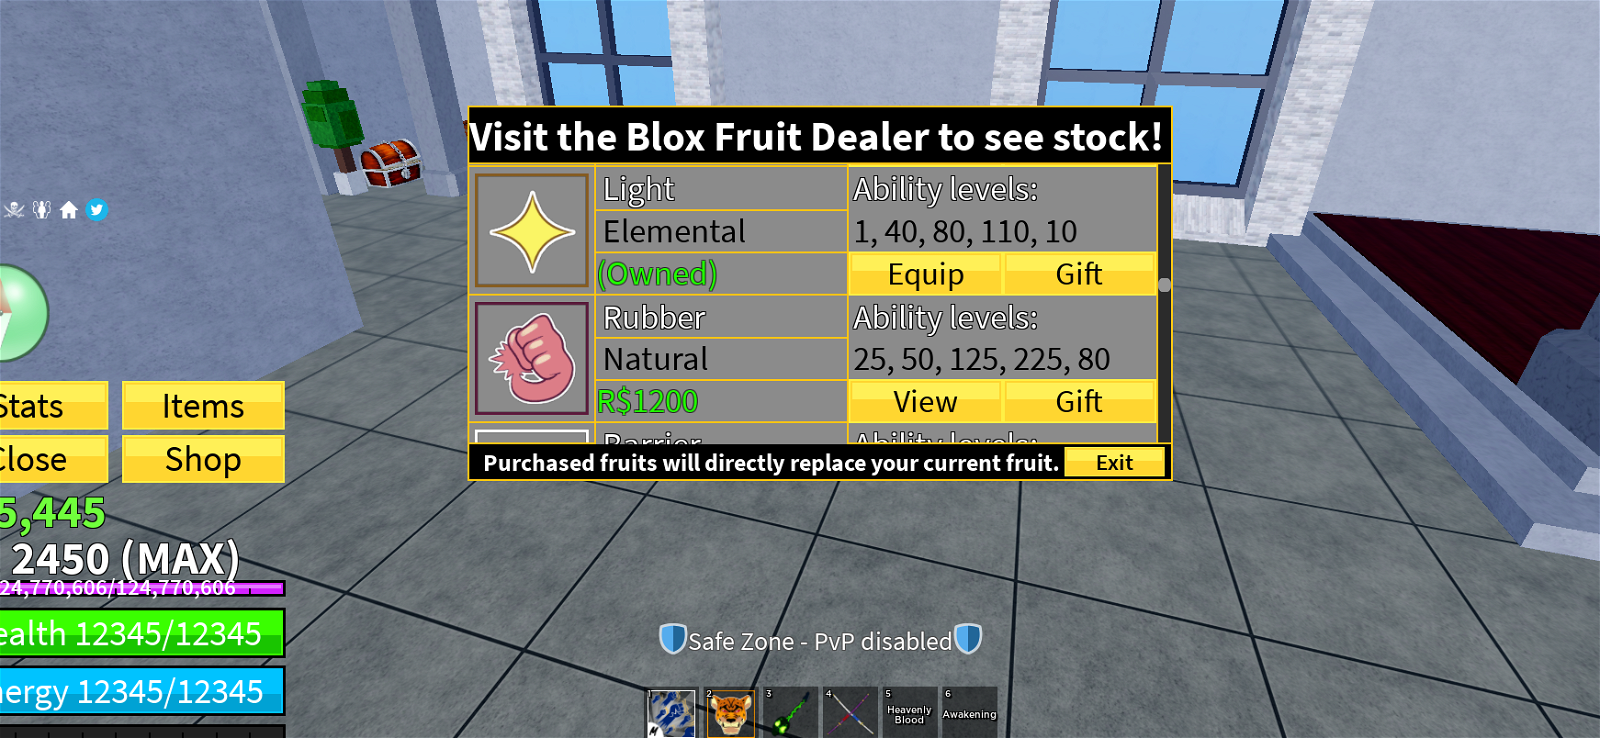 Blox Fruits Stock Right Now - FruityBlox